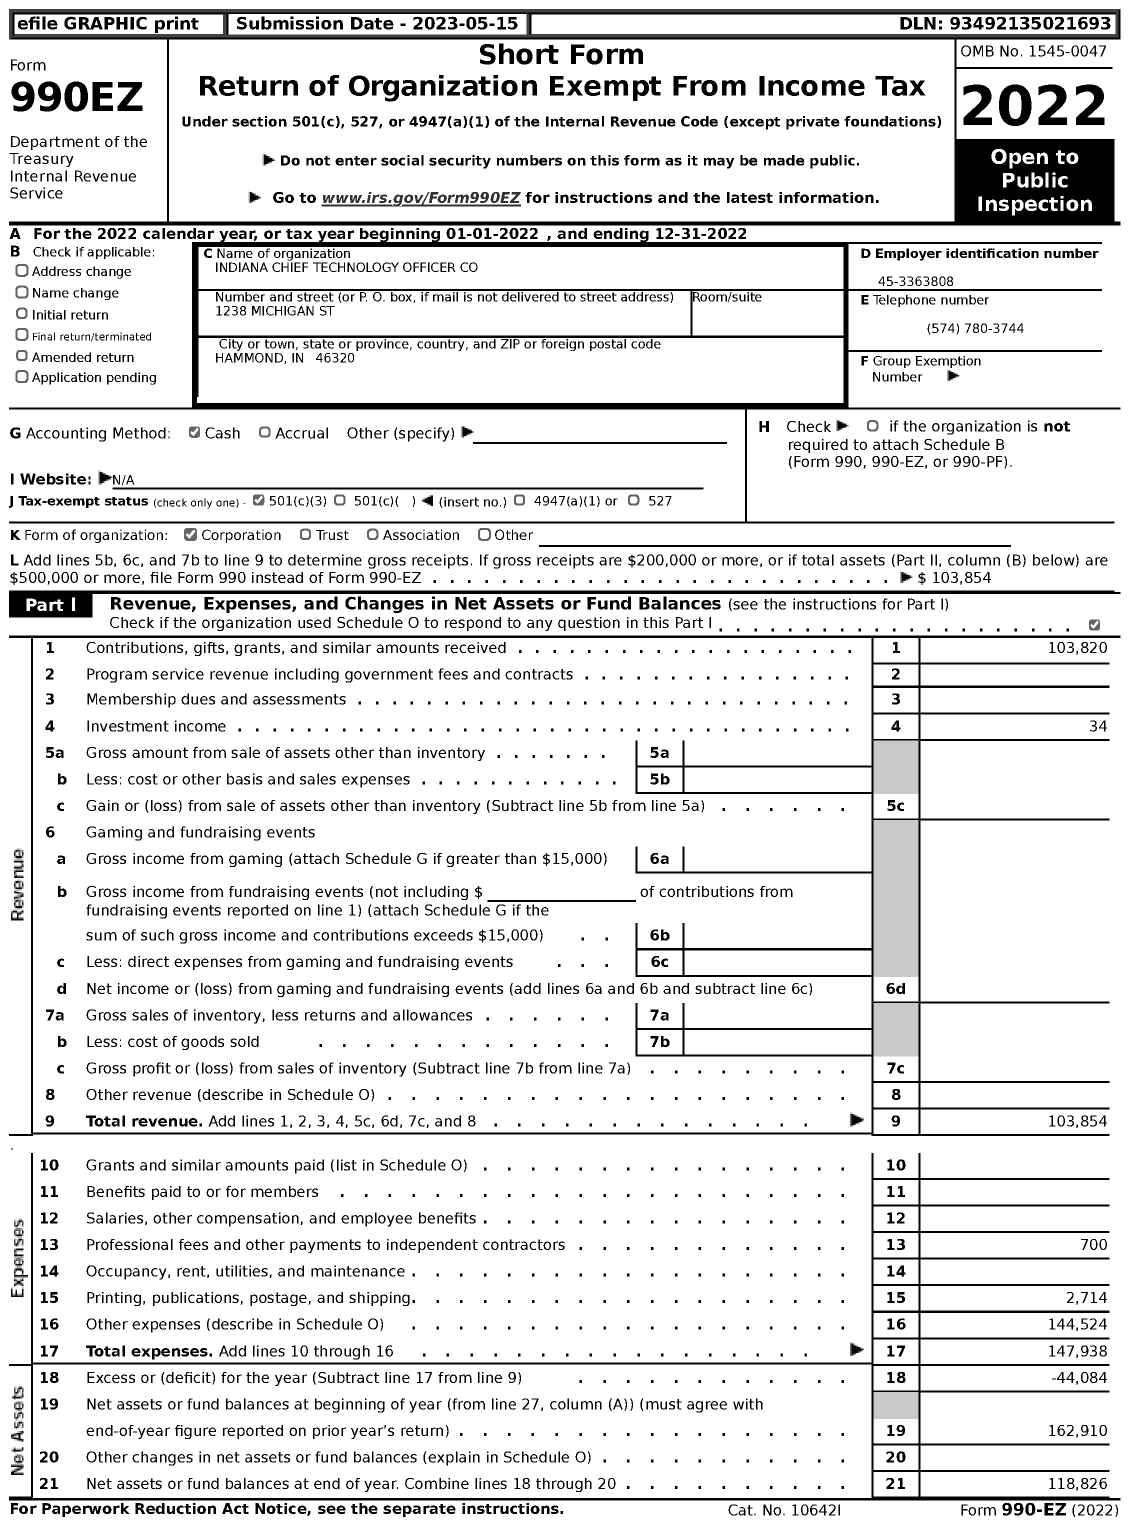 Image of first page of 2022 Form 990EZ for Indiana Chief Technology Officer